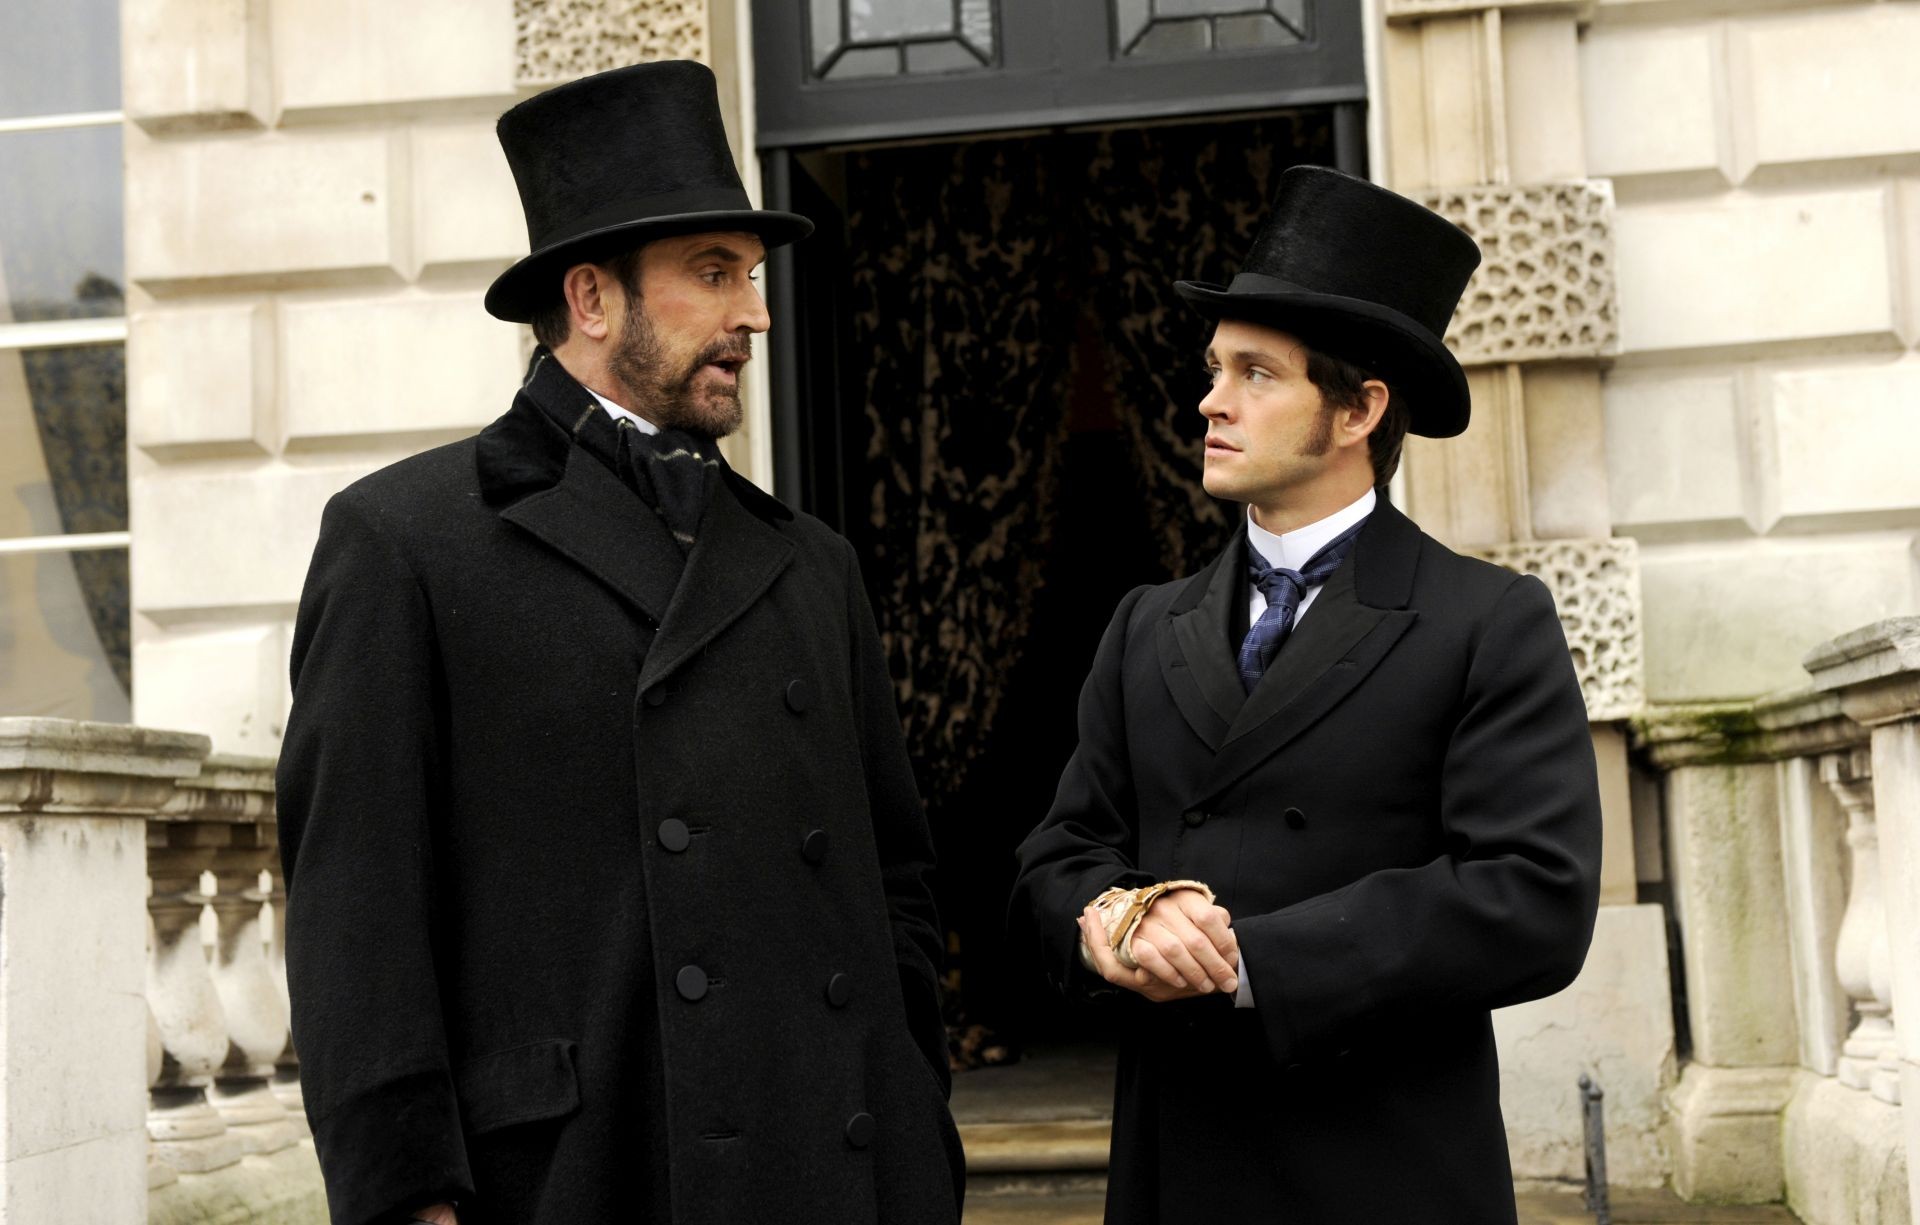 Rupert Everett stars as Lord Edmund St. John-Smythe and Hugh Dancy stars as Dr. Mortimer Granville in Sony Pictures Classics' Hysteria (2012). Photo credit by Liam Daniel.